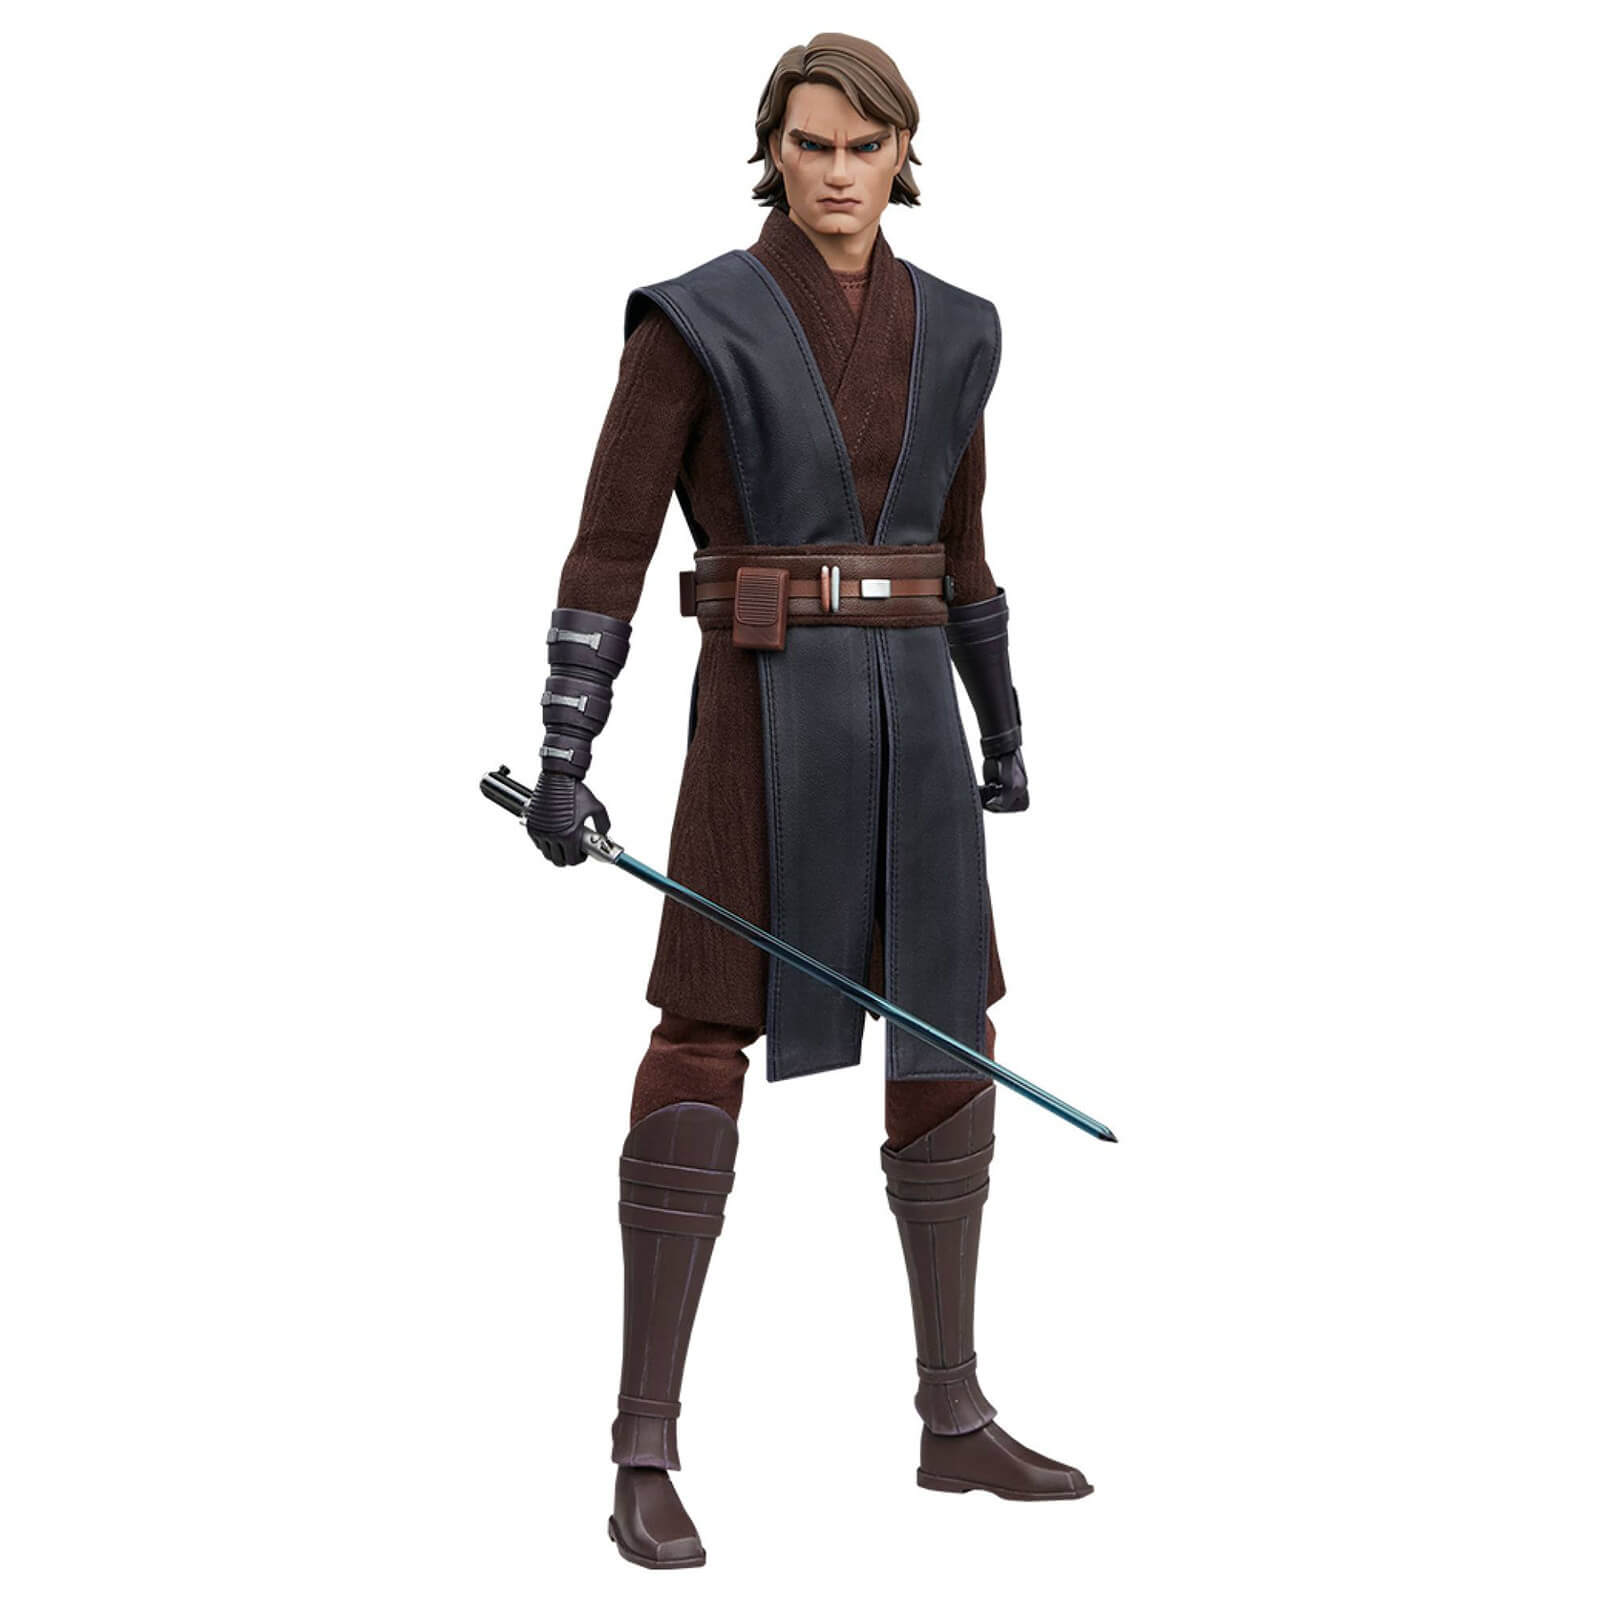 Sideshow Star Wars The Clone Wars Action Figure 1/6 Anakin Skywalker 31 cm product